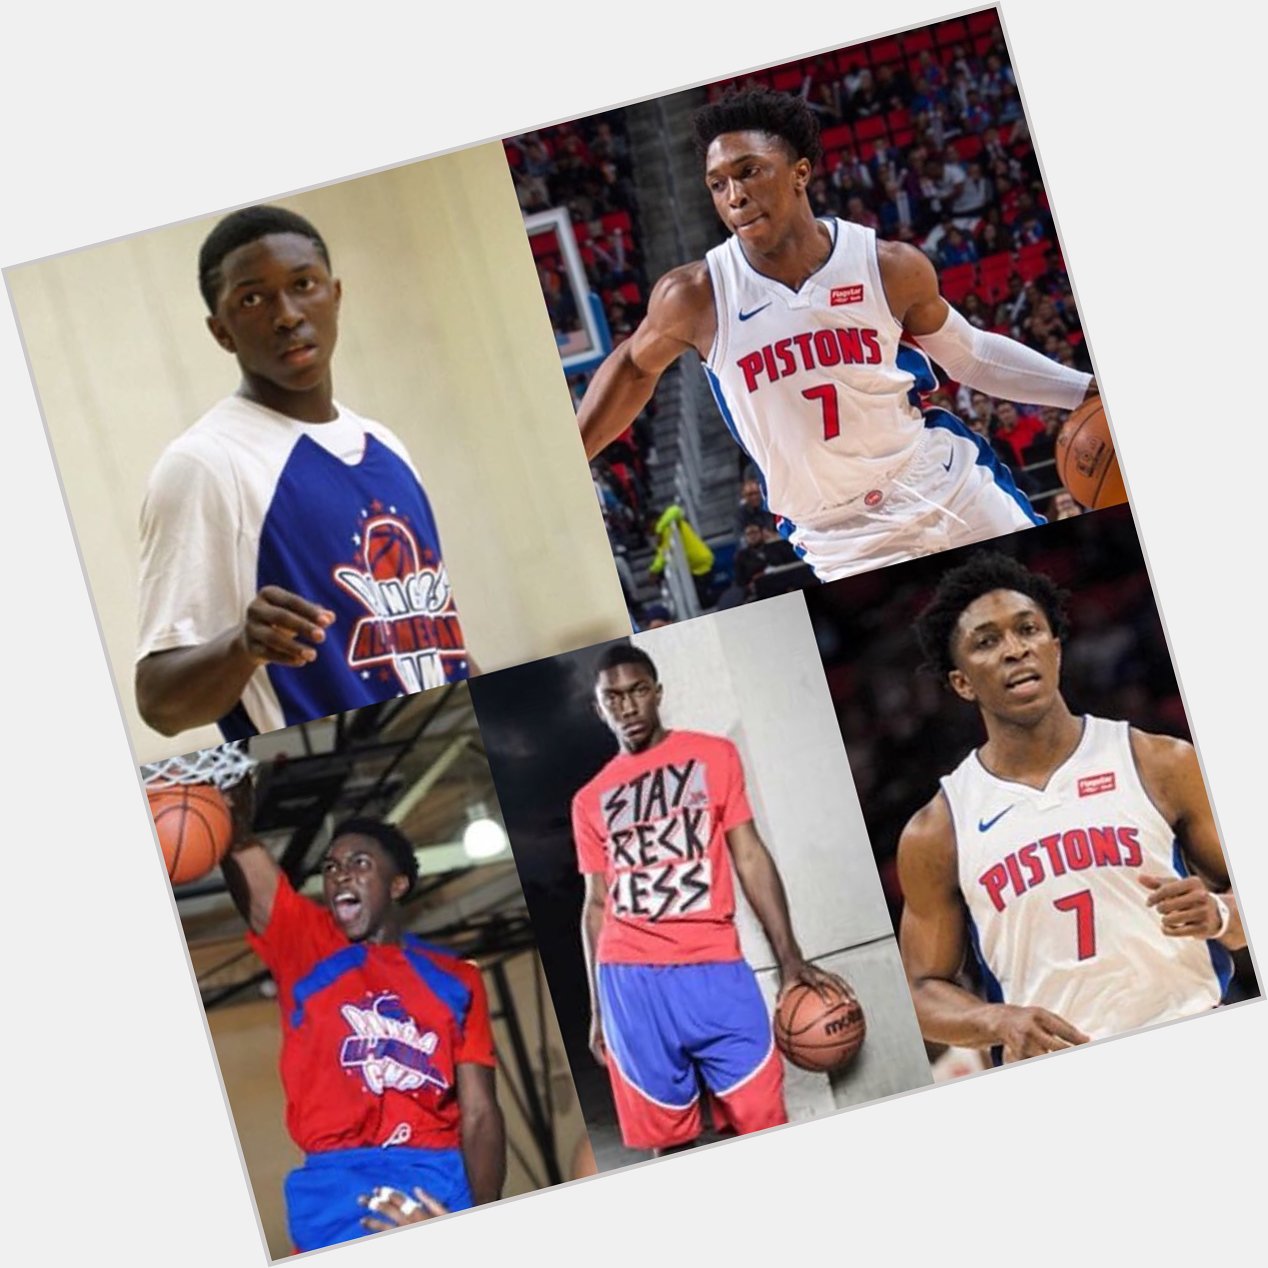 Wishing a happy birthday to 2013 MOP (& multi year standout) Stanley Johnson   